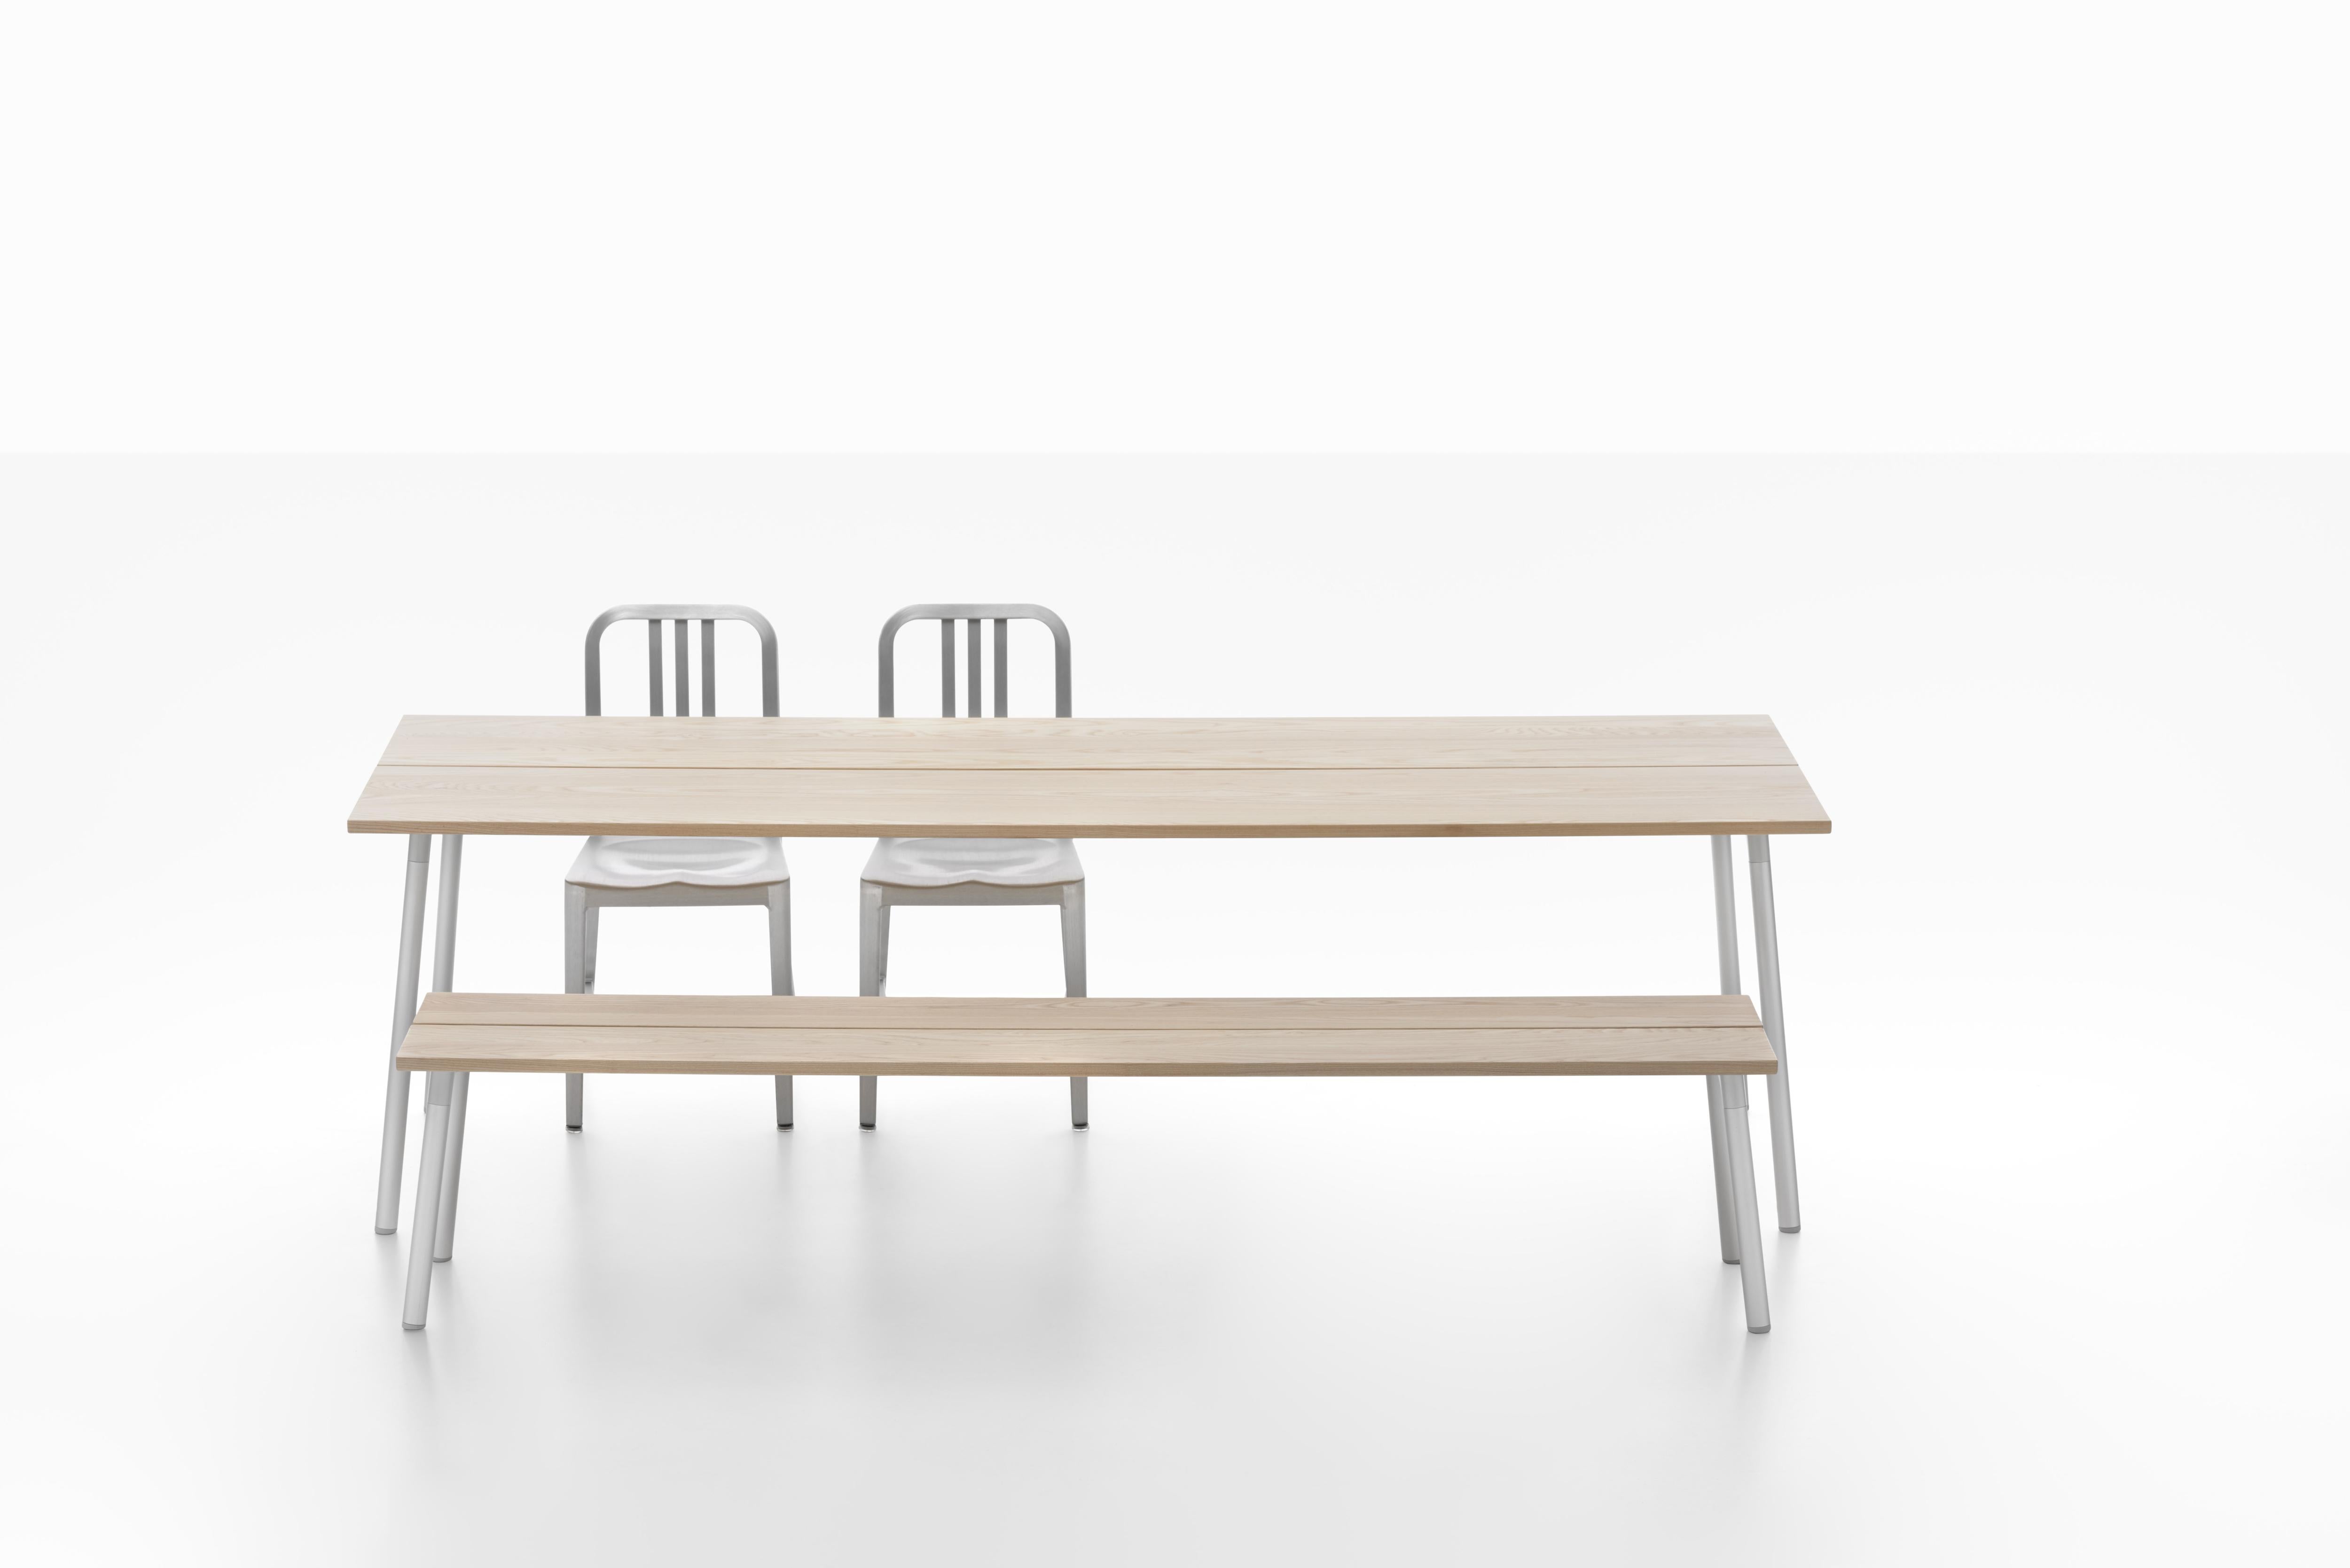 Contemporary Emeco Run 3-Seat Bench in Aluminum and Cedar by Sam Hecht and Kim Colin